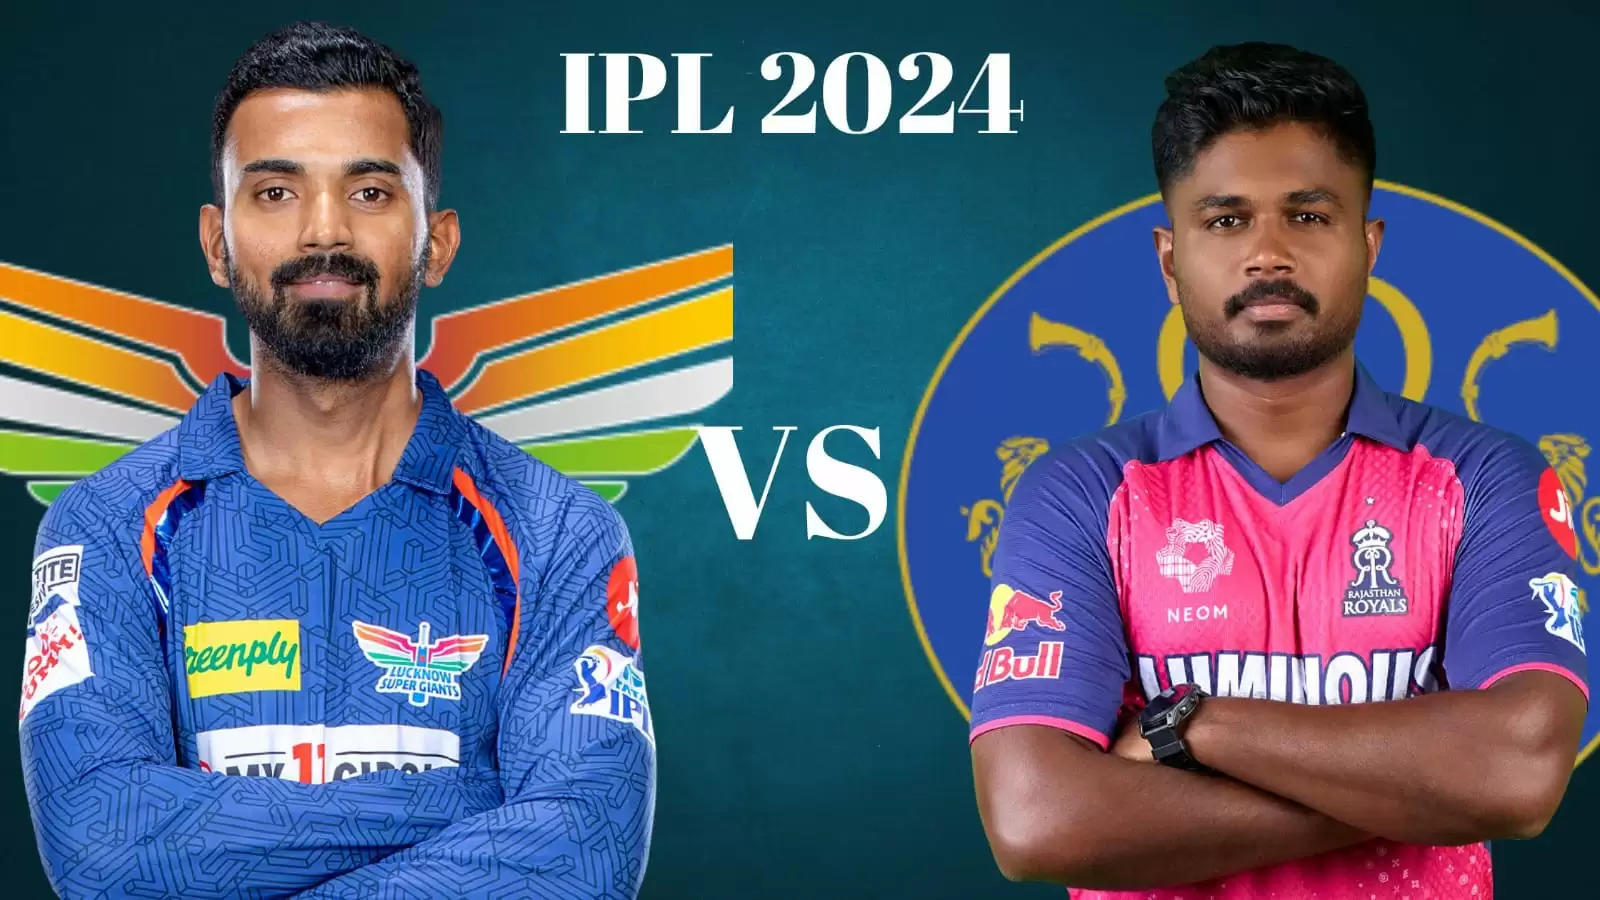 LKN vs RR Dream11 Prediction Today Match 44: Playing XI, IPL 2024 Fantasy Cricket Tips, Lucknow Super Giants vs Rajasthan Royals Dream11 Team, Weather and Pitch Report, Injury Updates and Team News